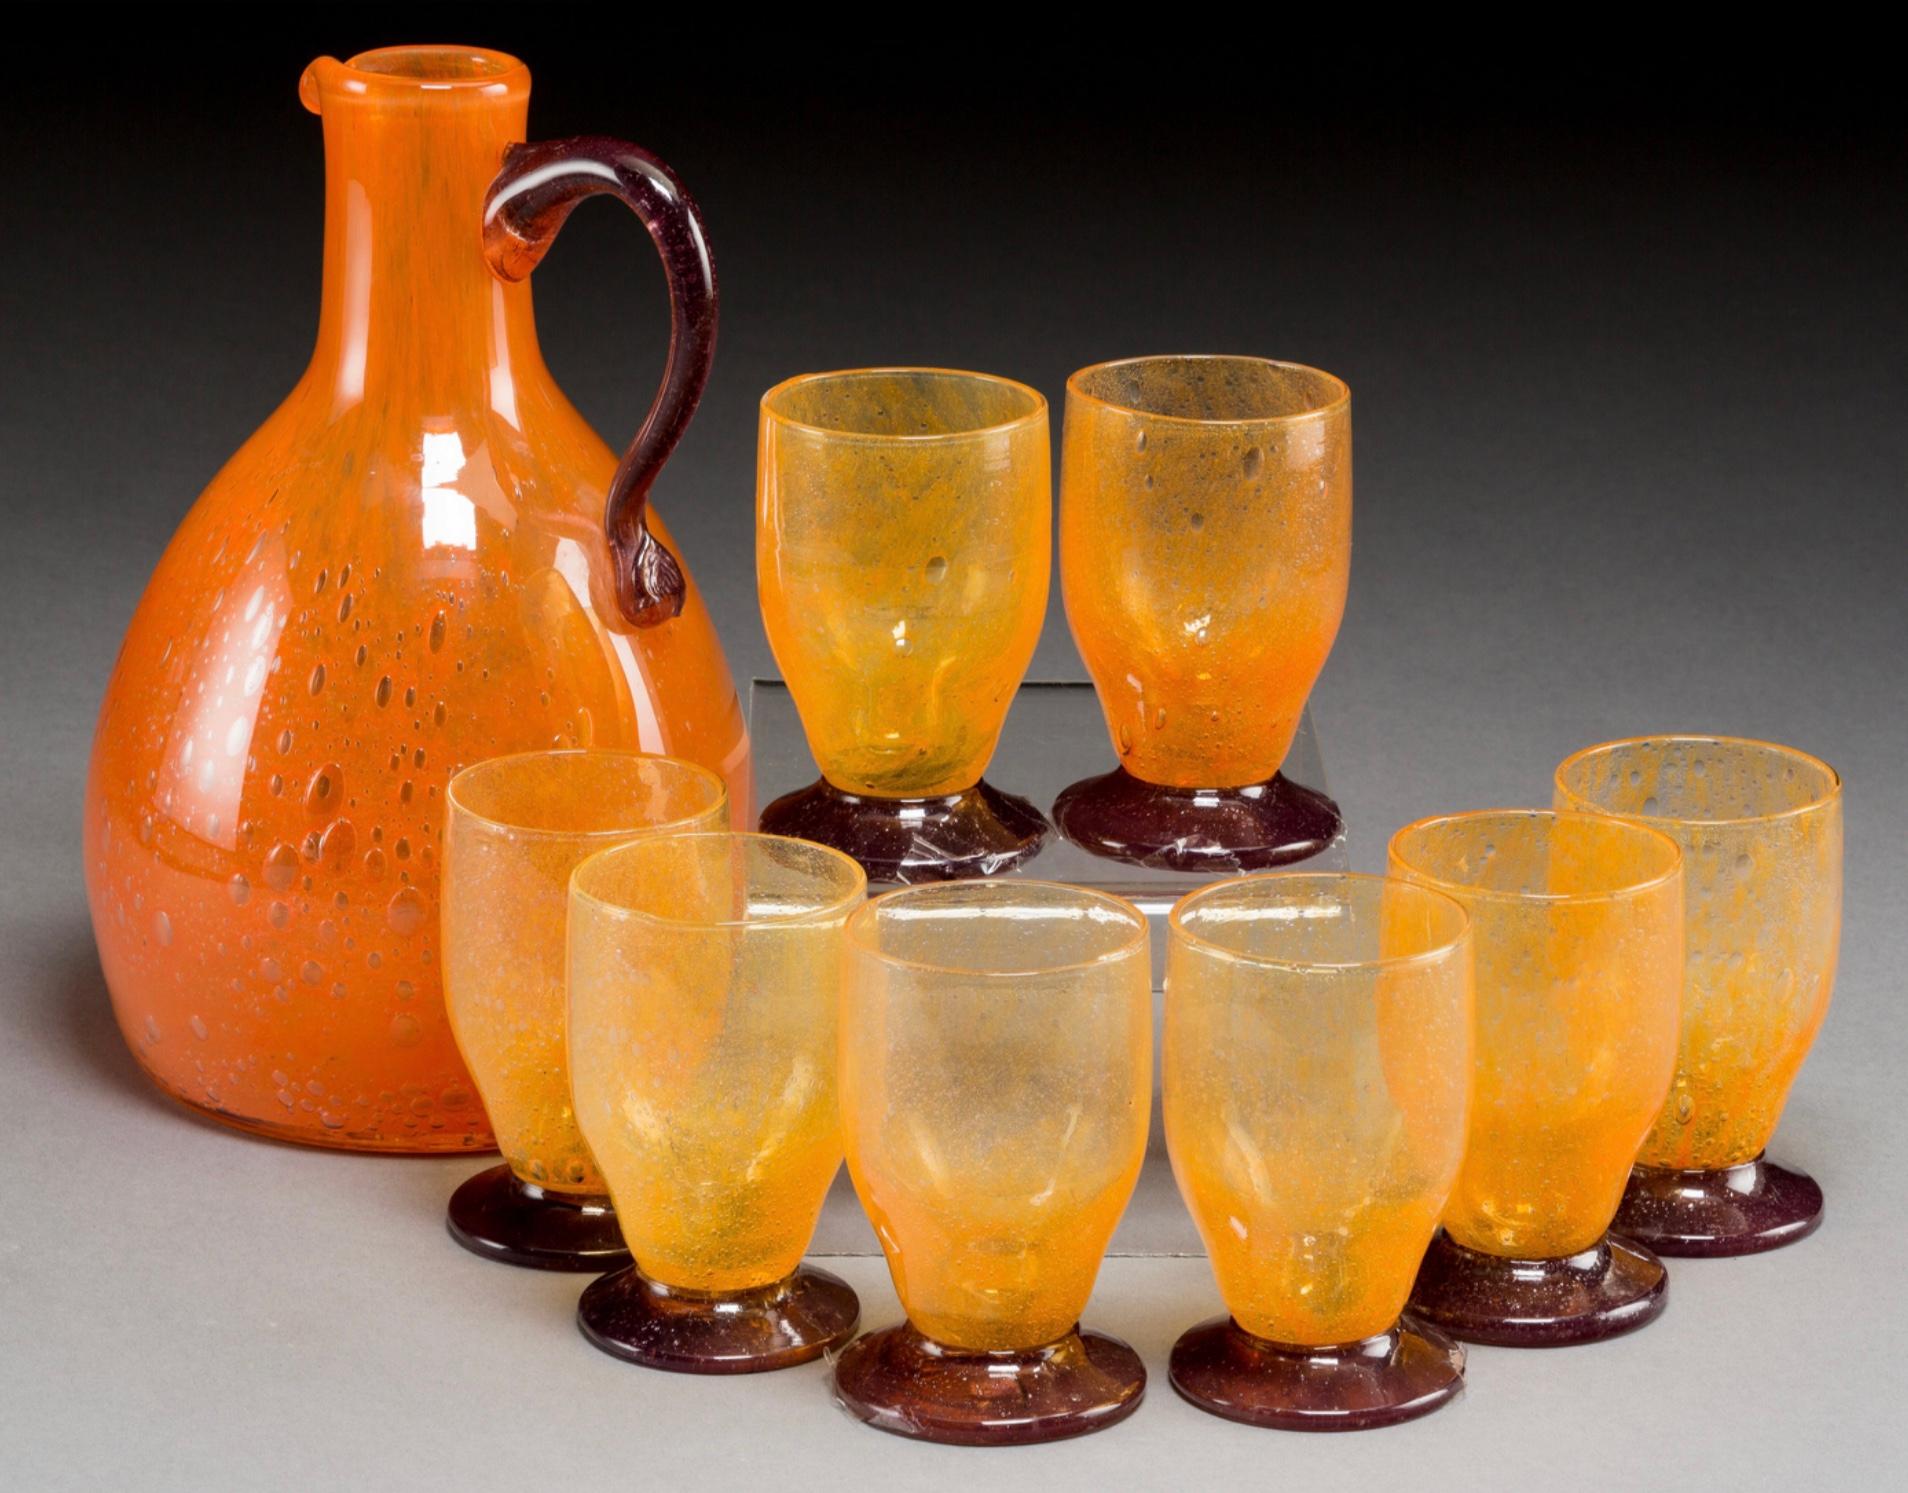 A beautiful set of Art Deco Daum Nancy bubble glass carafe with eight cordials in a sumptuous orange with purple colors, circa 1930.

Engraved Daum Nancy, France

Height: 7.25 inches (carafe)
Diameter: 5 inches (carafe)
Height: 3.15 inches